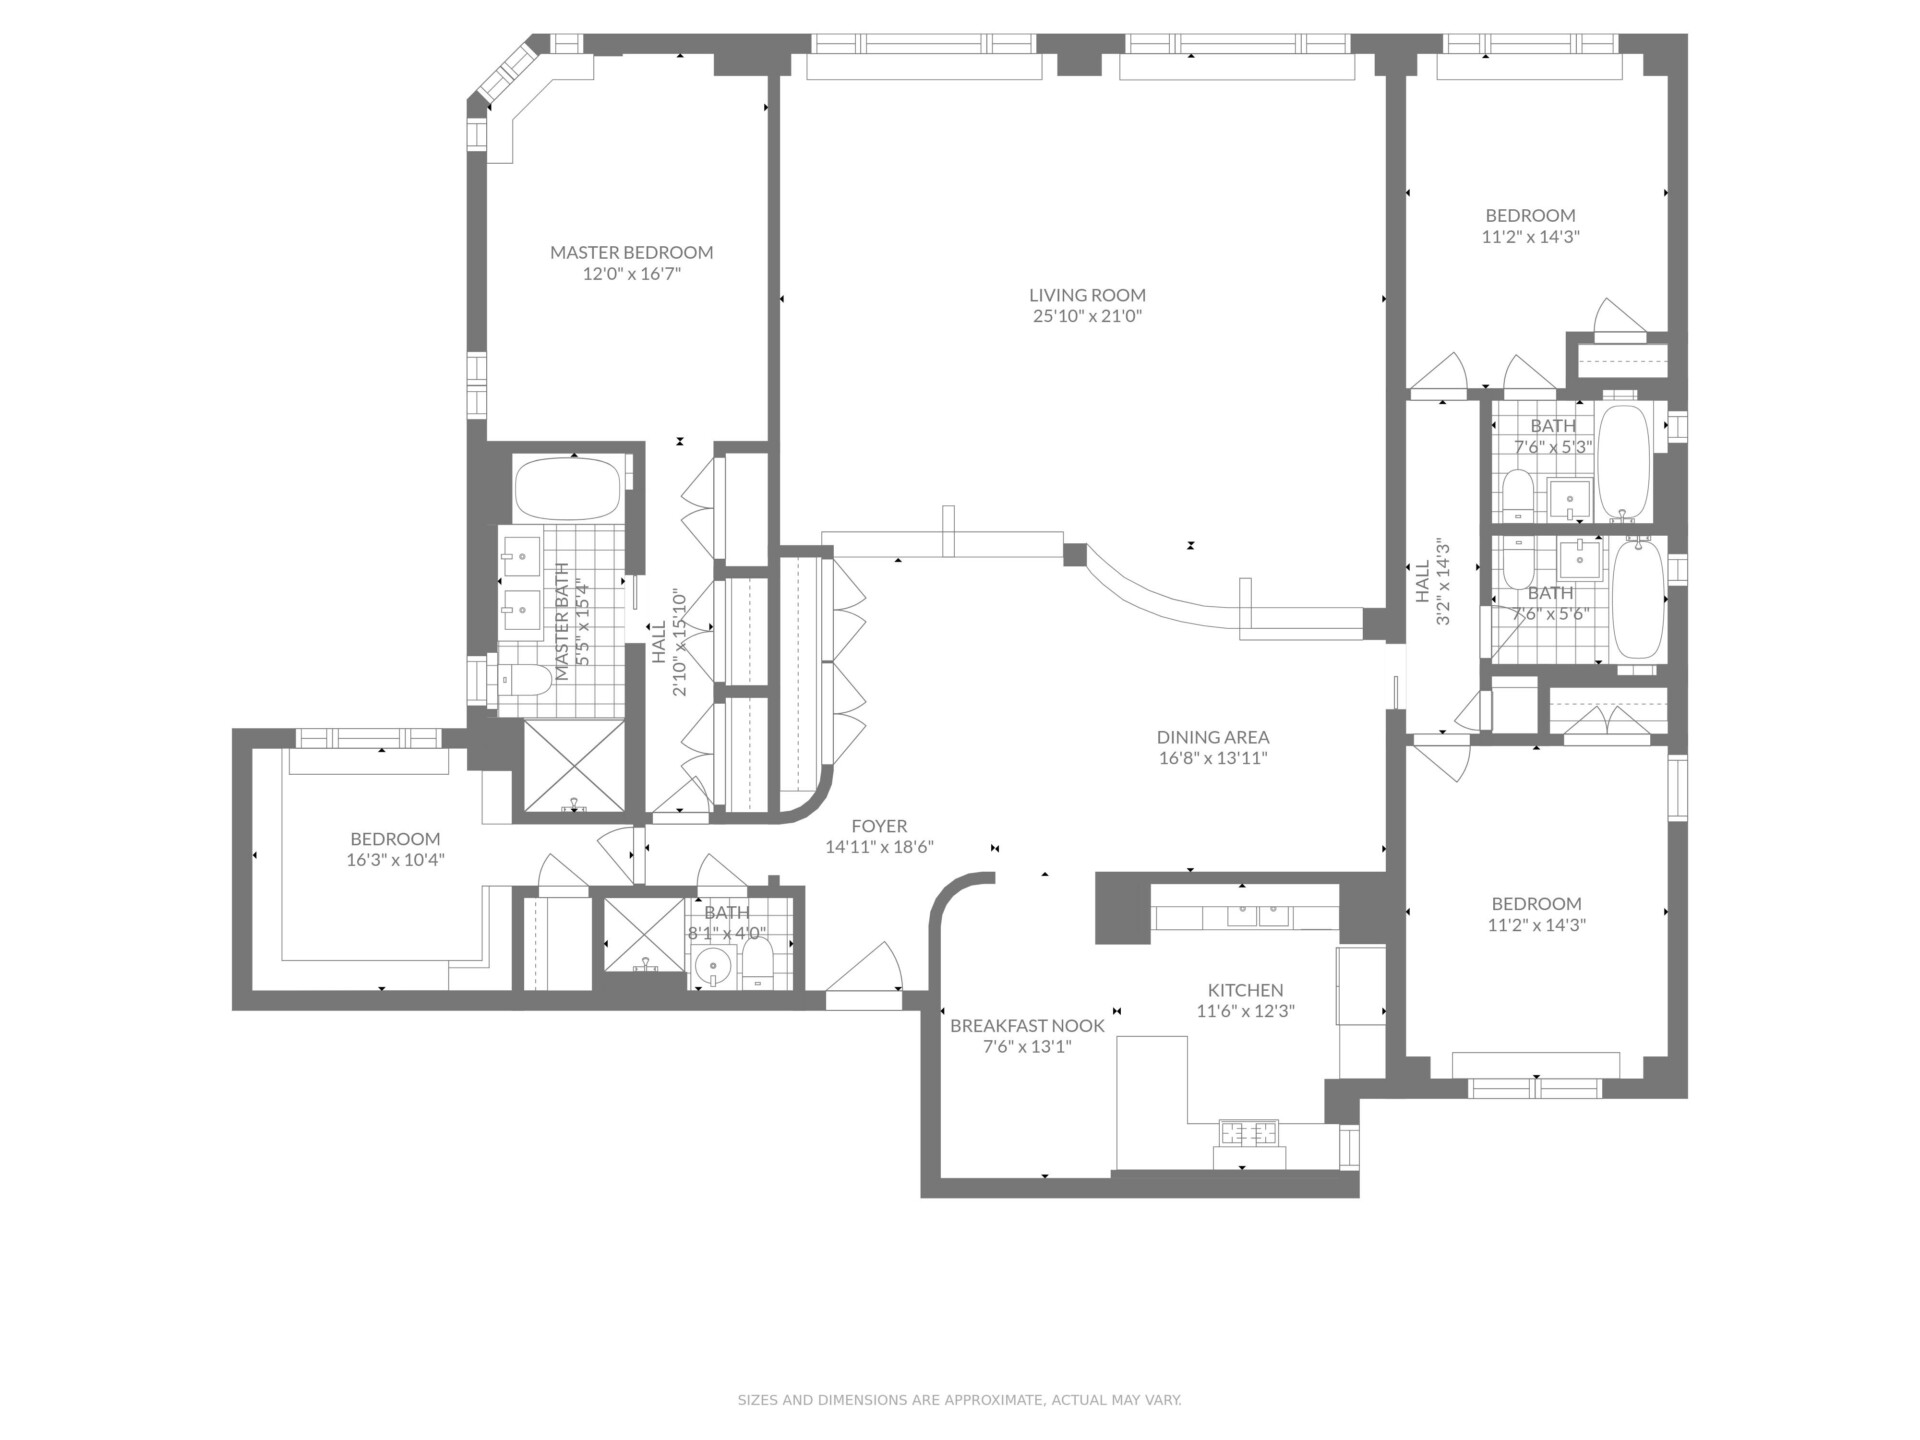 Real Estate Floor Plan Services in NJ and NYC - Starting at $150